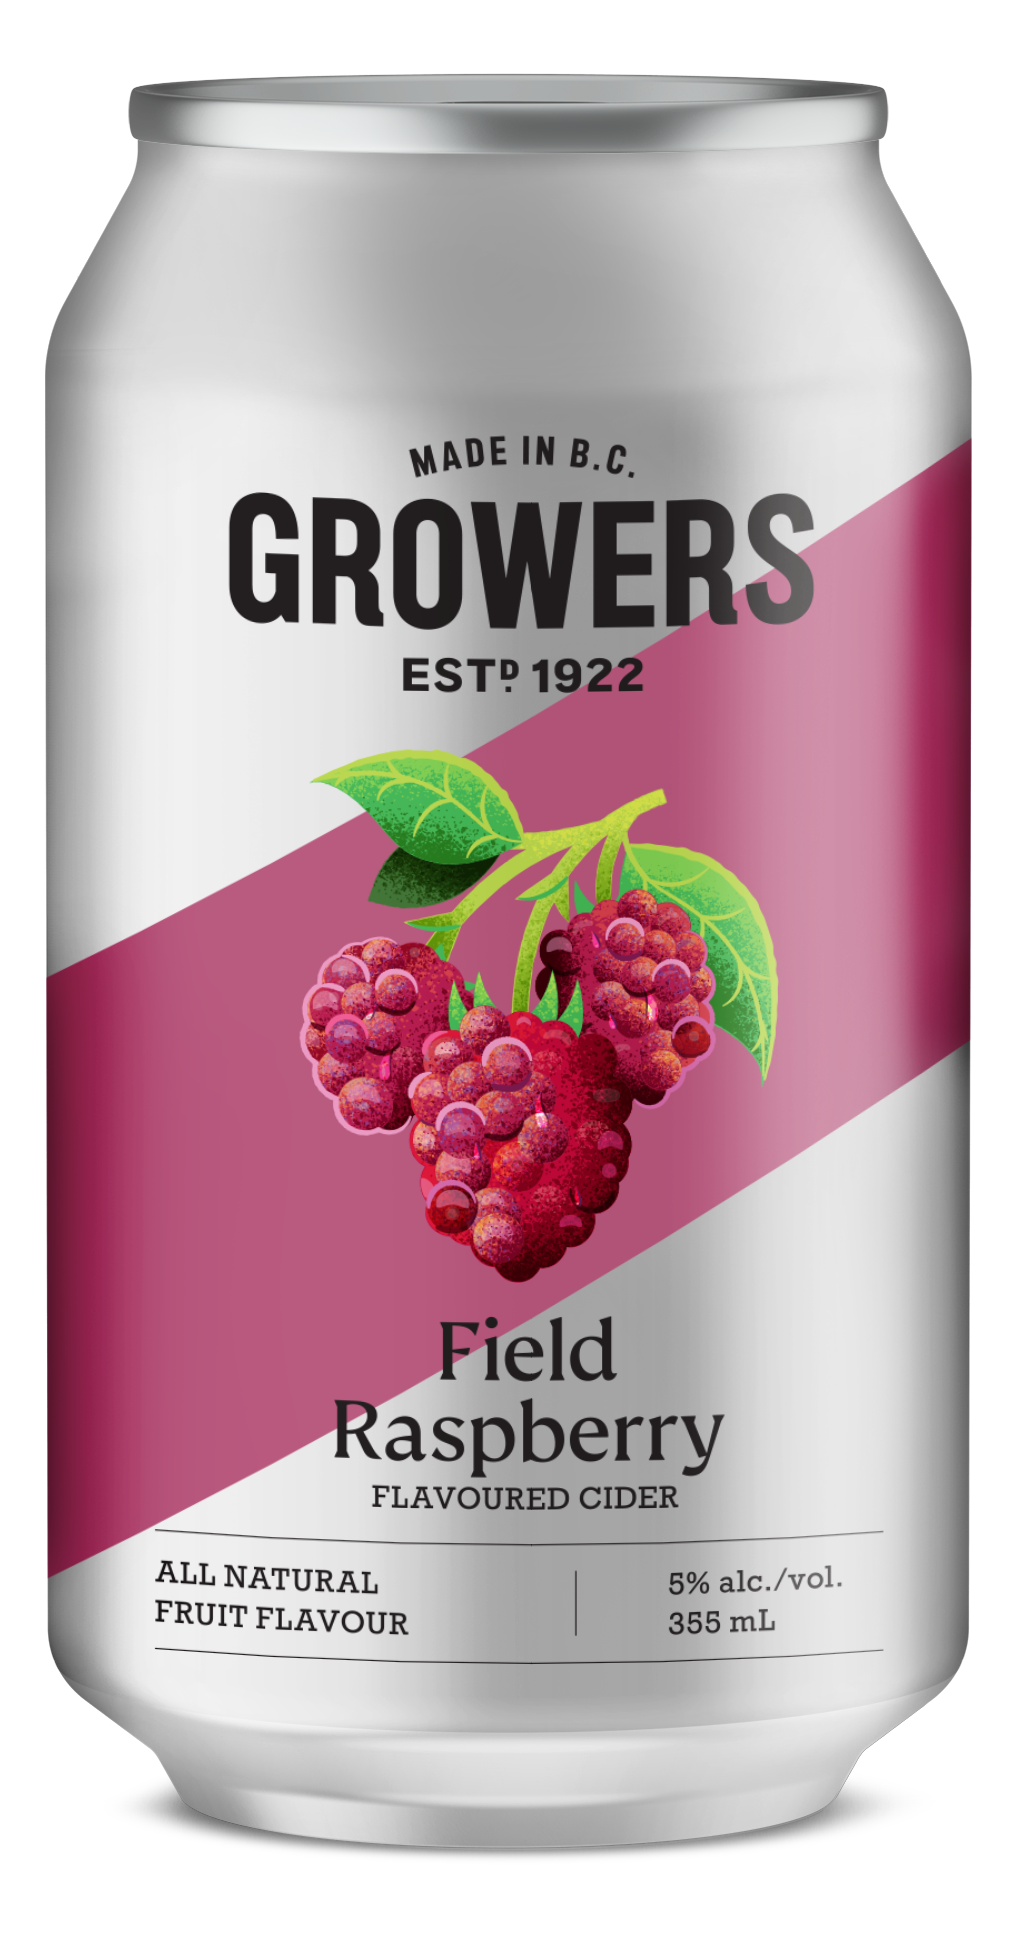 Can of Growers Field Raspberry cider